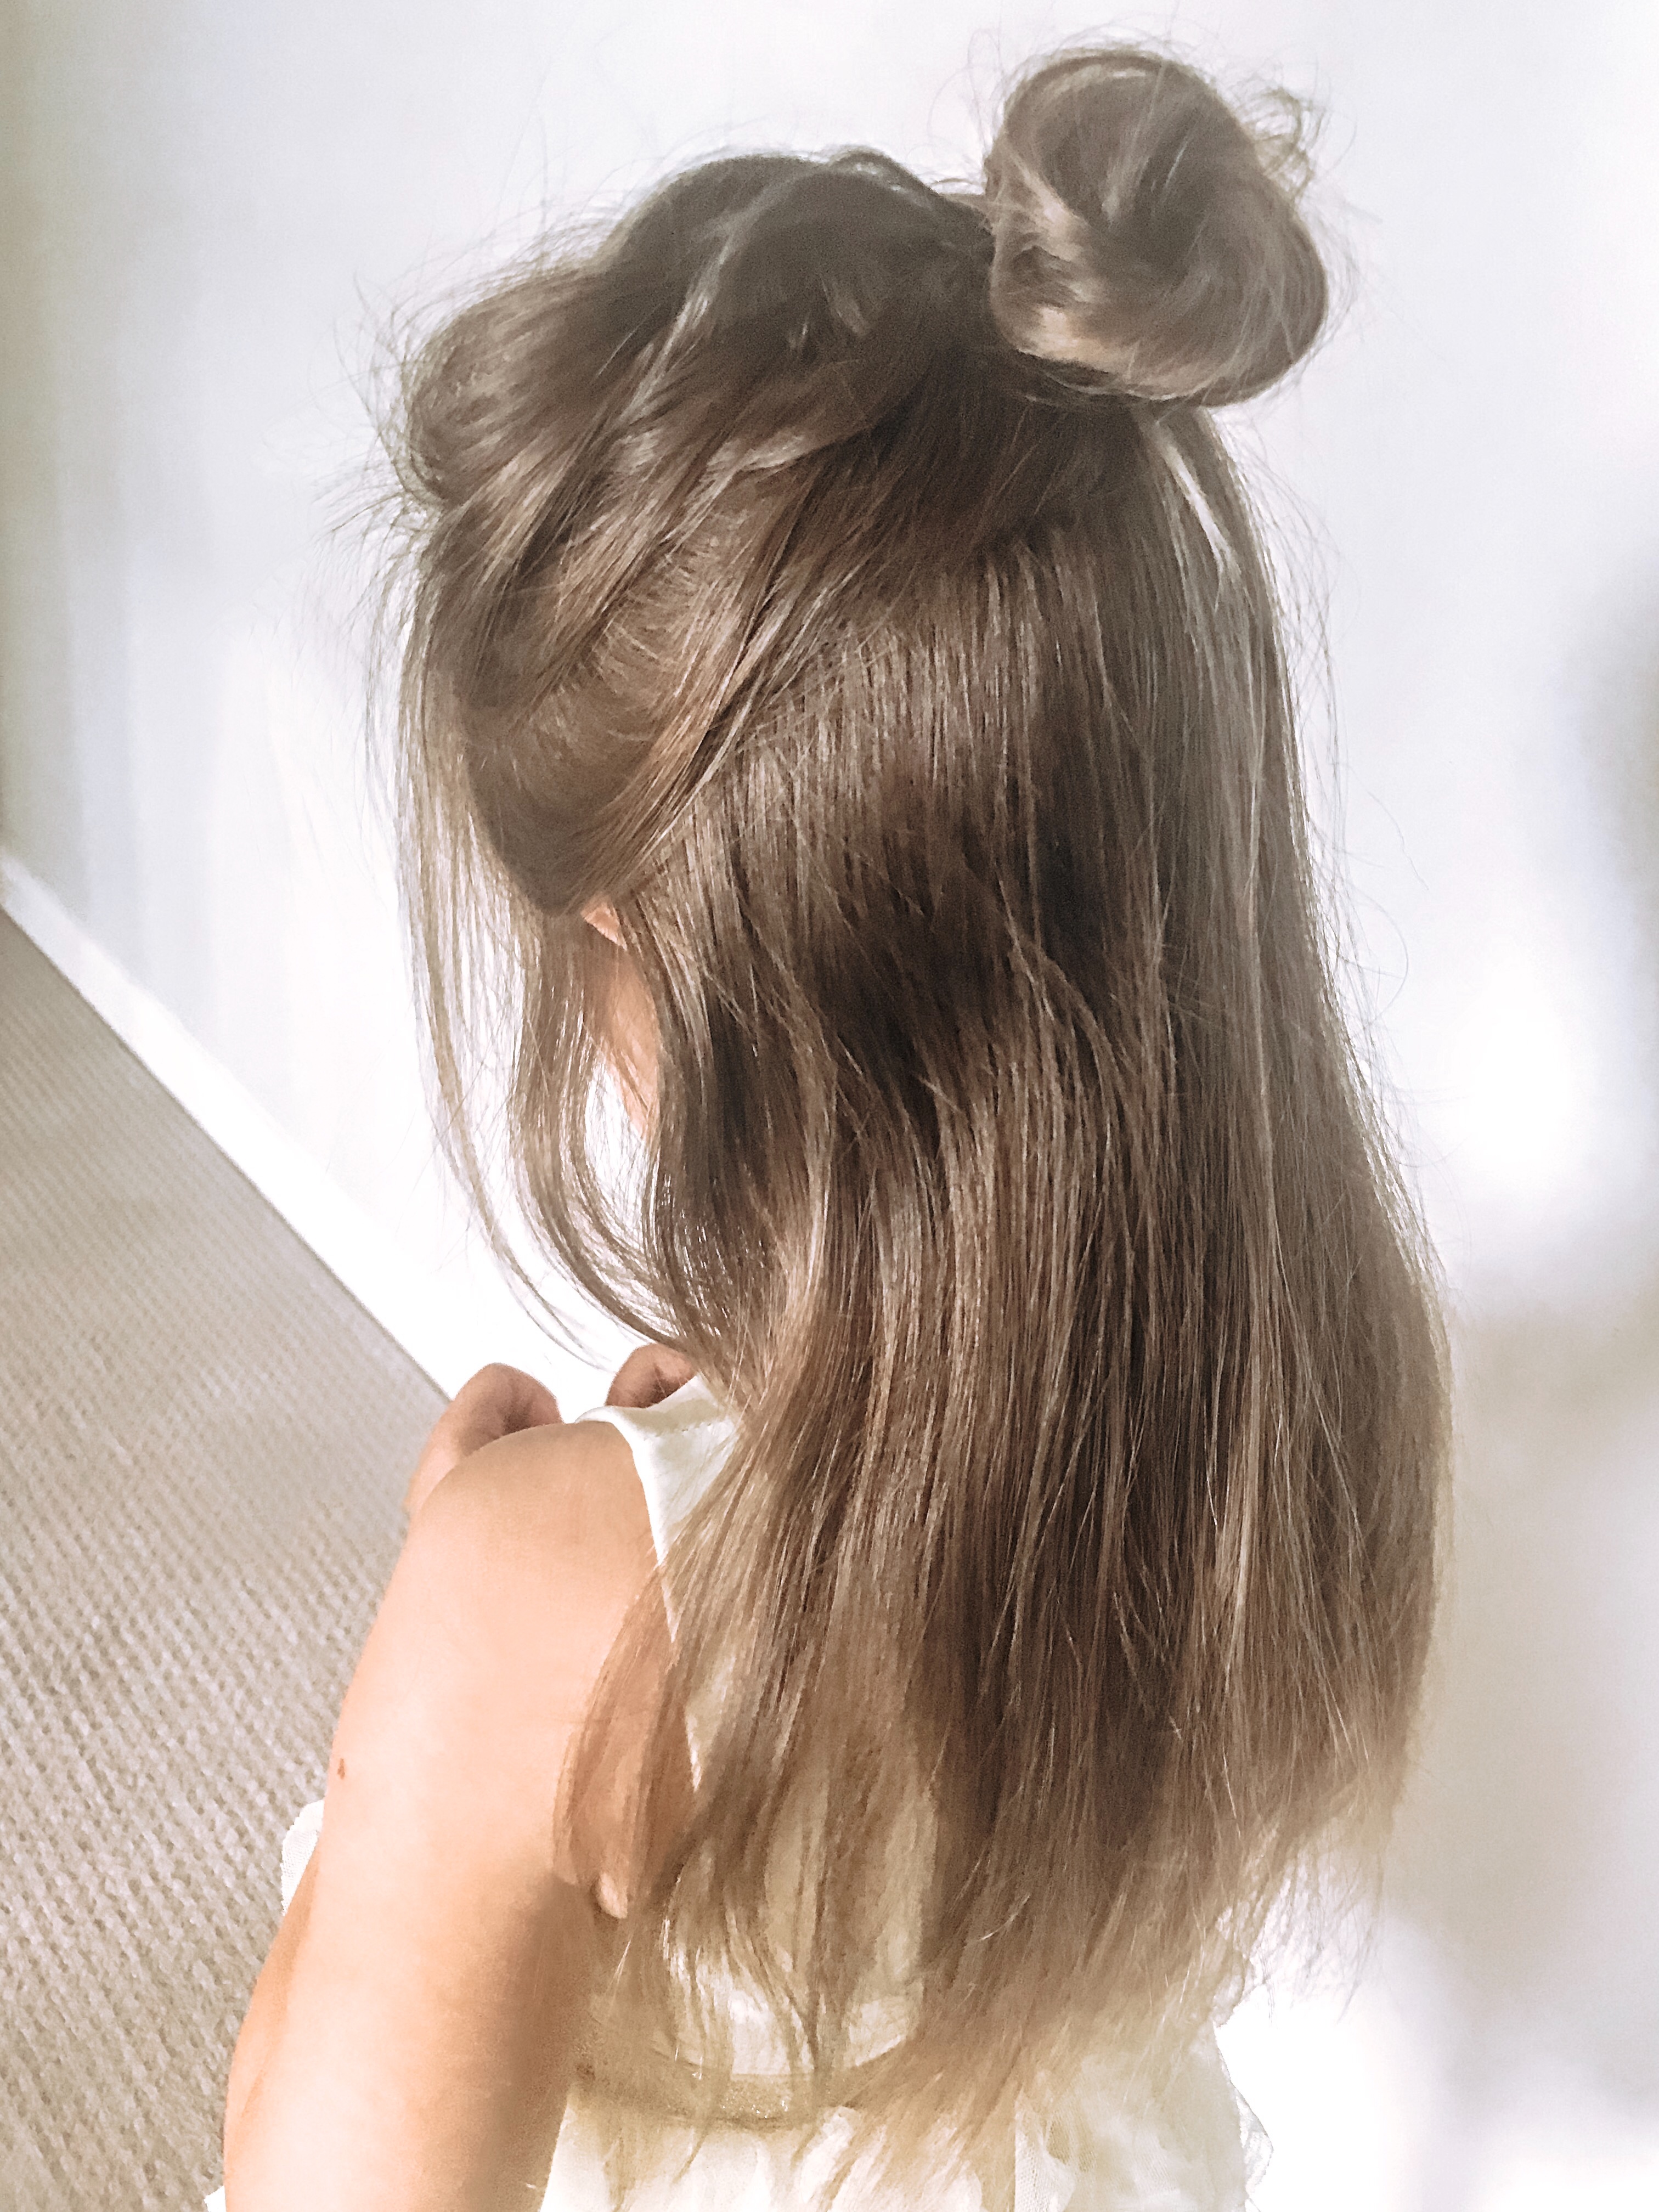 Easy Disney Princess Hairstyles your Little Girl will Love